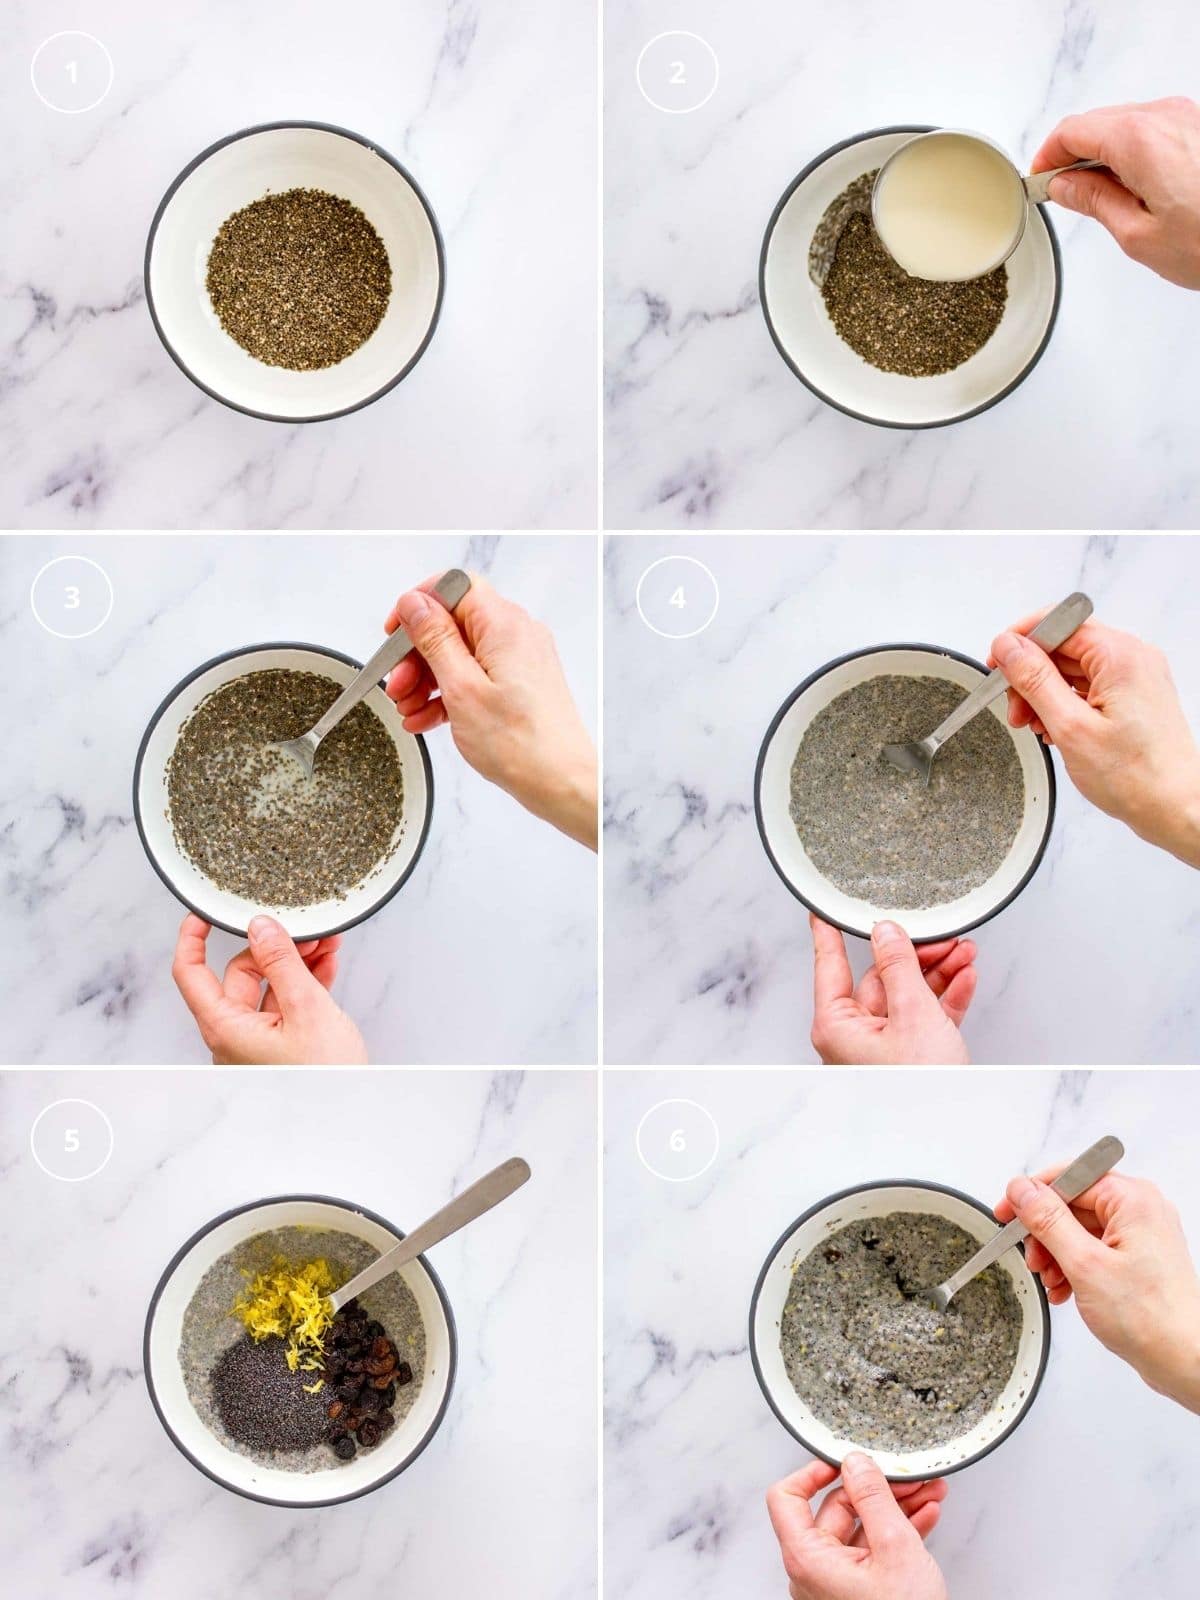 Lemon Poppy Seed Chia Pudding step by step instructions